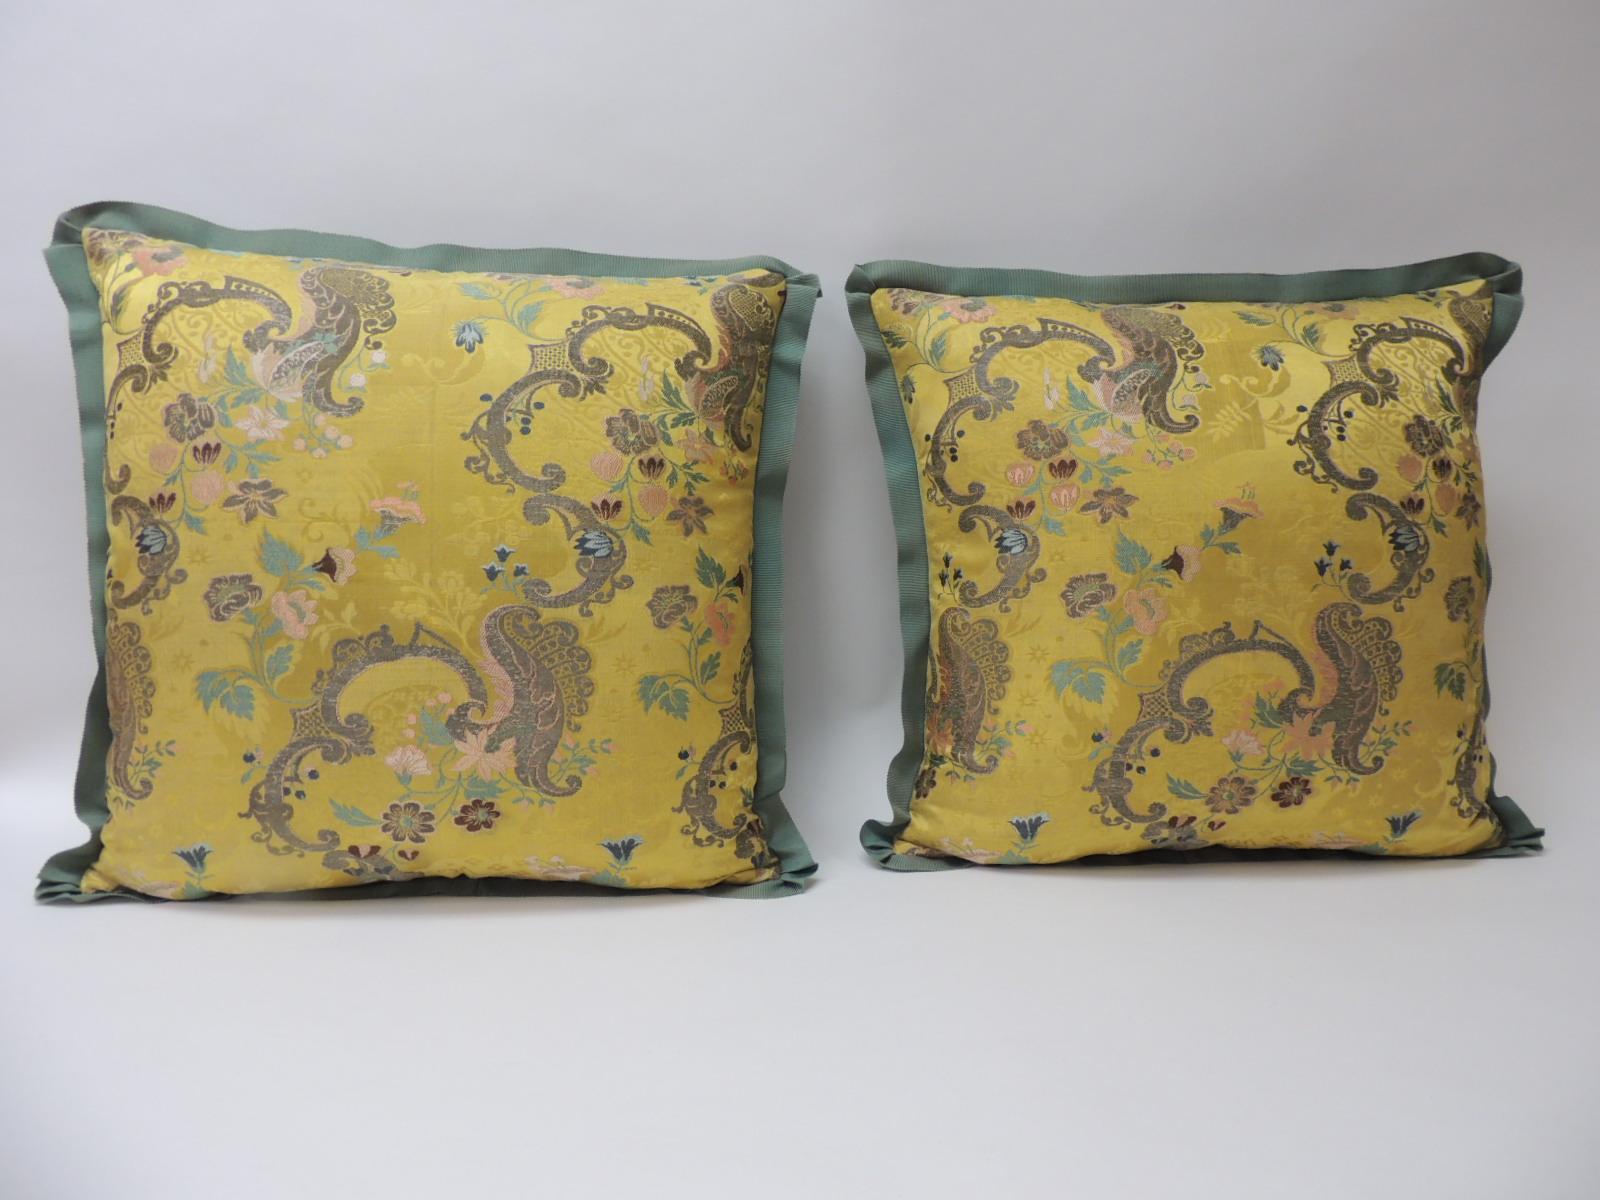 Pair of 18th century green and gold brocaded French silk decorative pillows. Antique textile embroidered with silk and gold metallic threads. Floral pattern depicting flowers in bloom. Strié green silk backings. Embellished with a green French silk